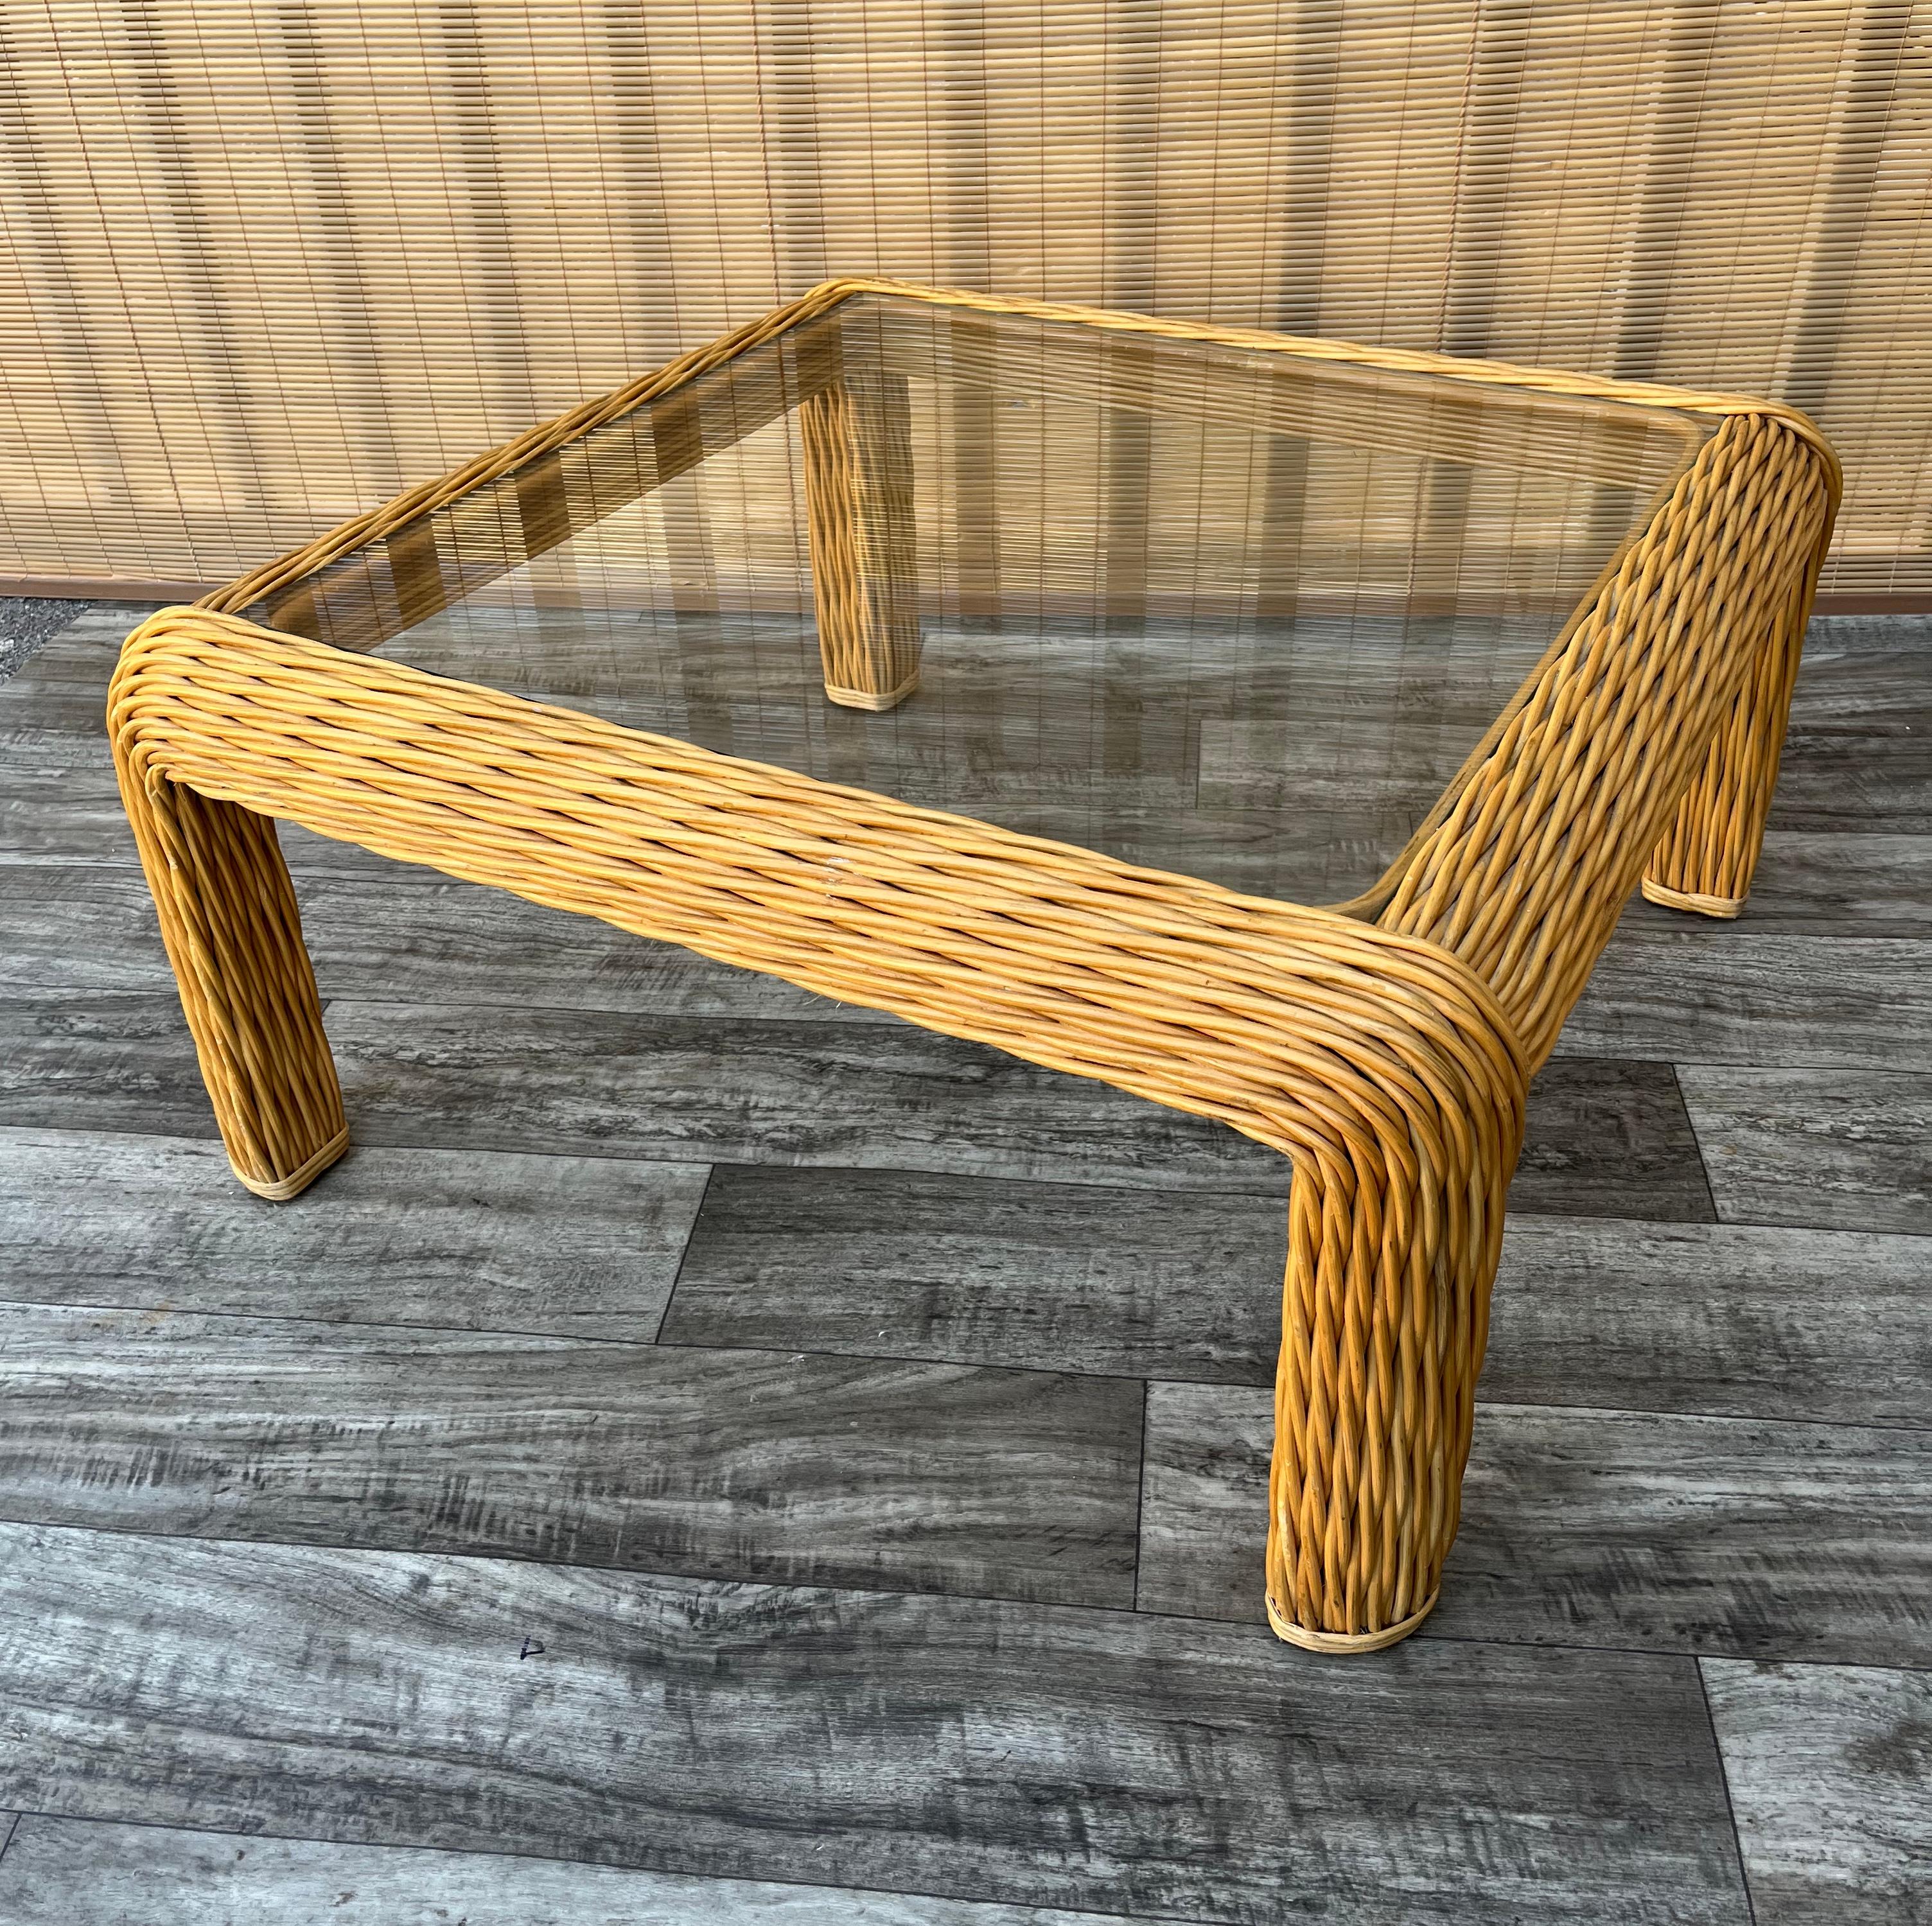 Wicker 1980s Coastal Style Braided Pencil Reed Rattan Coffee / Cocktail Table For Sale